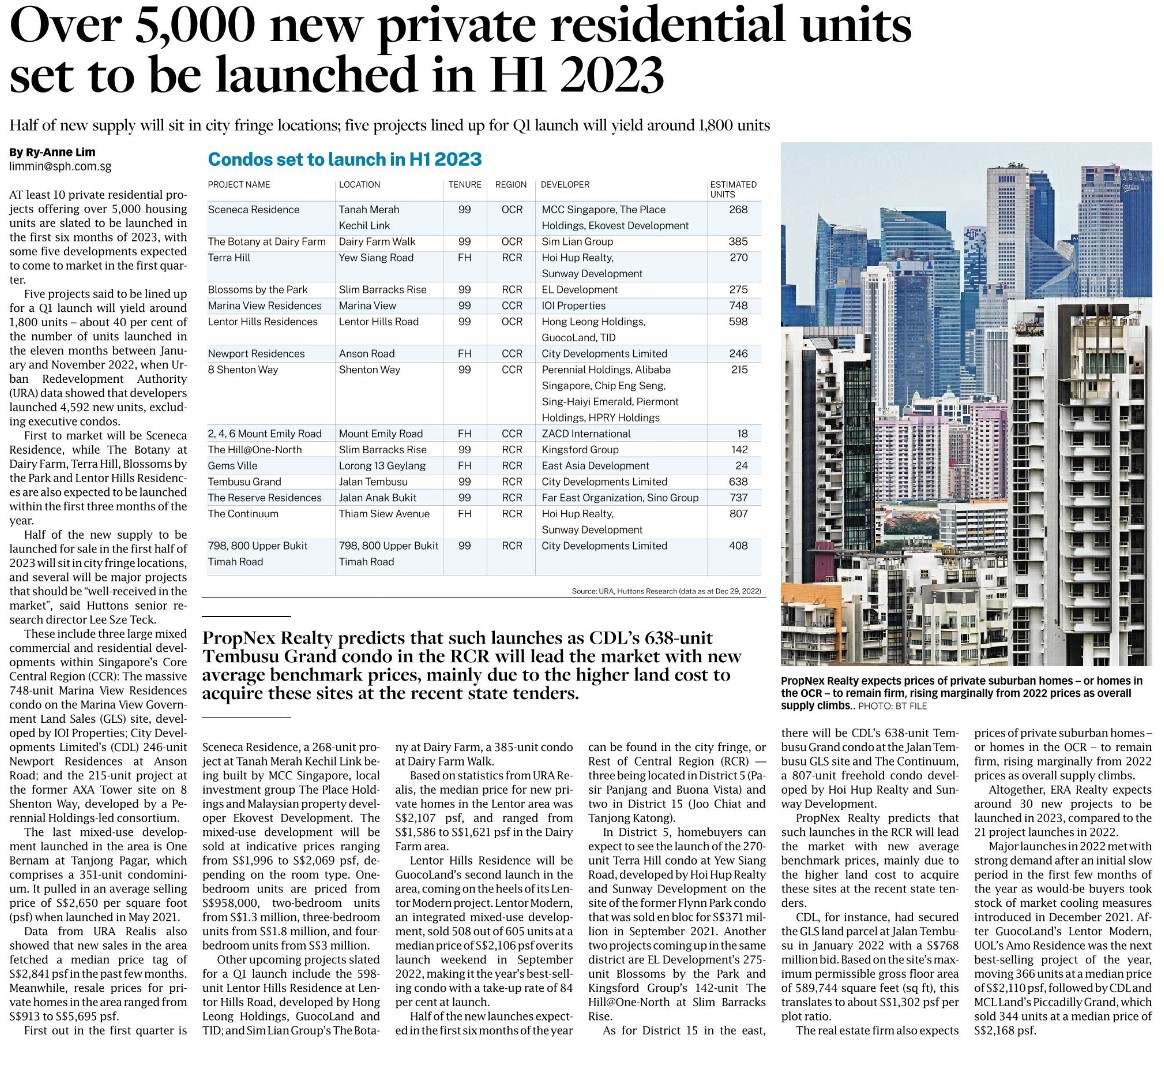 the-continuum-over-5000-new-private-residential-units-set-to-be-launched-in-h1-2023-singapore